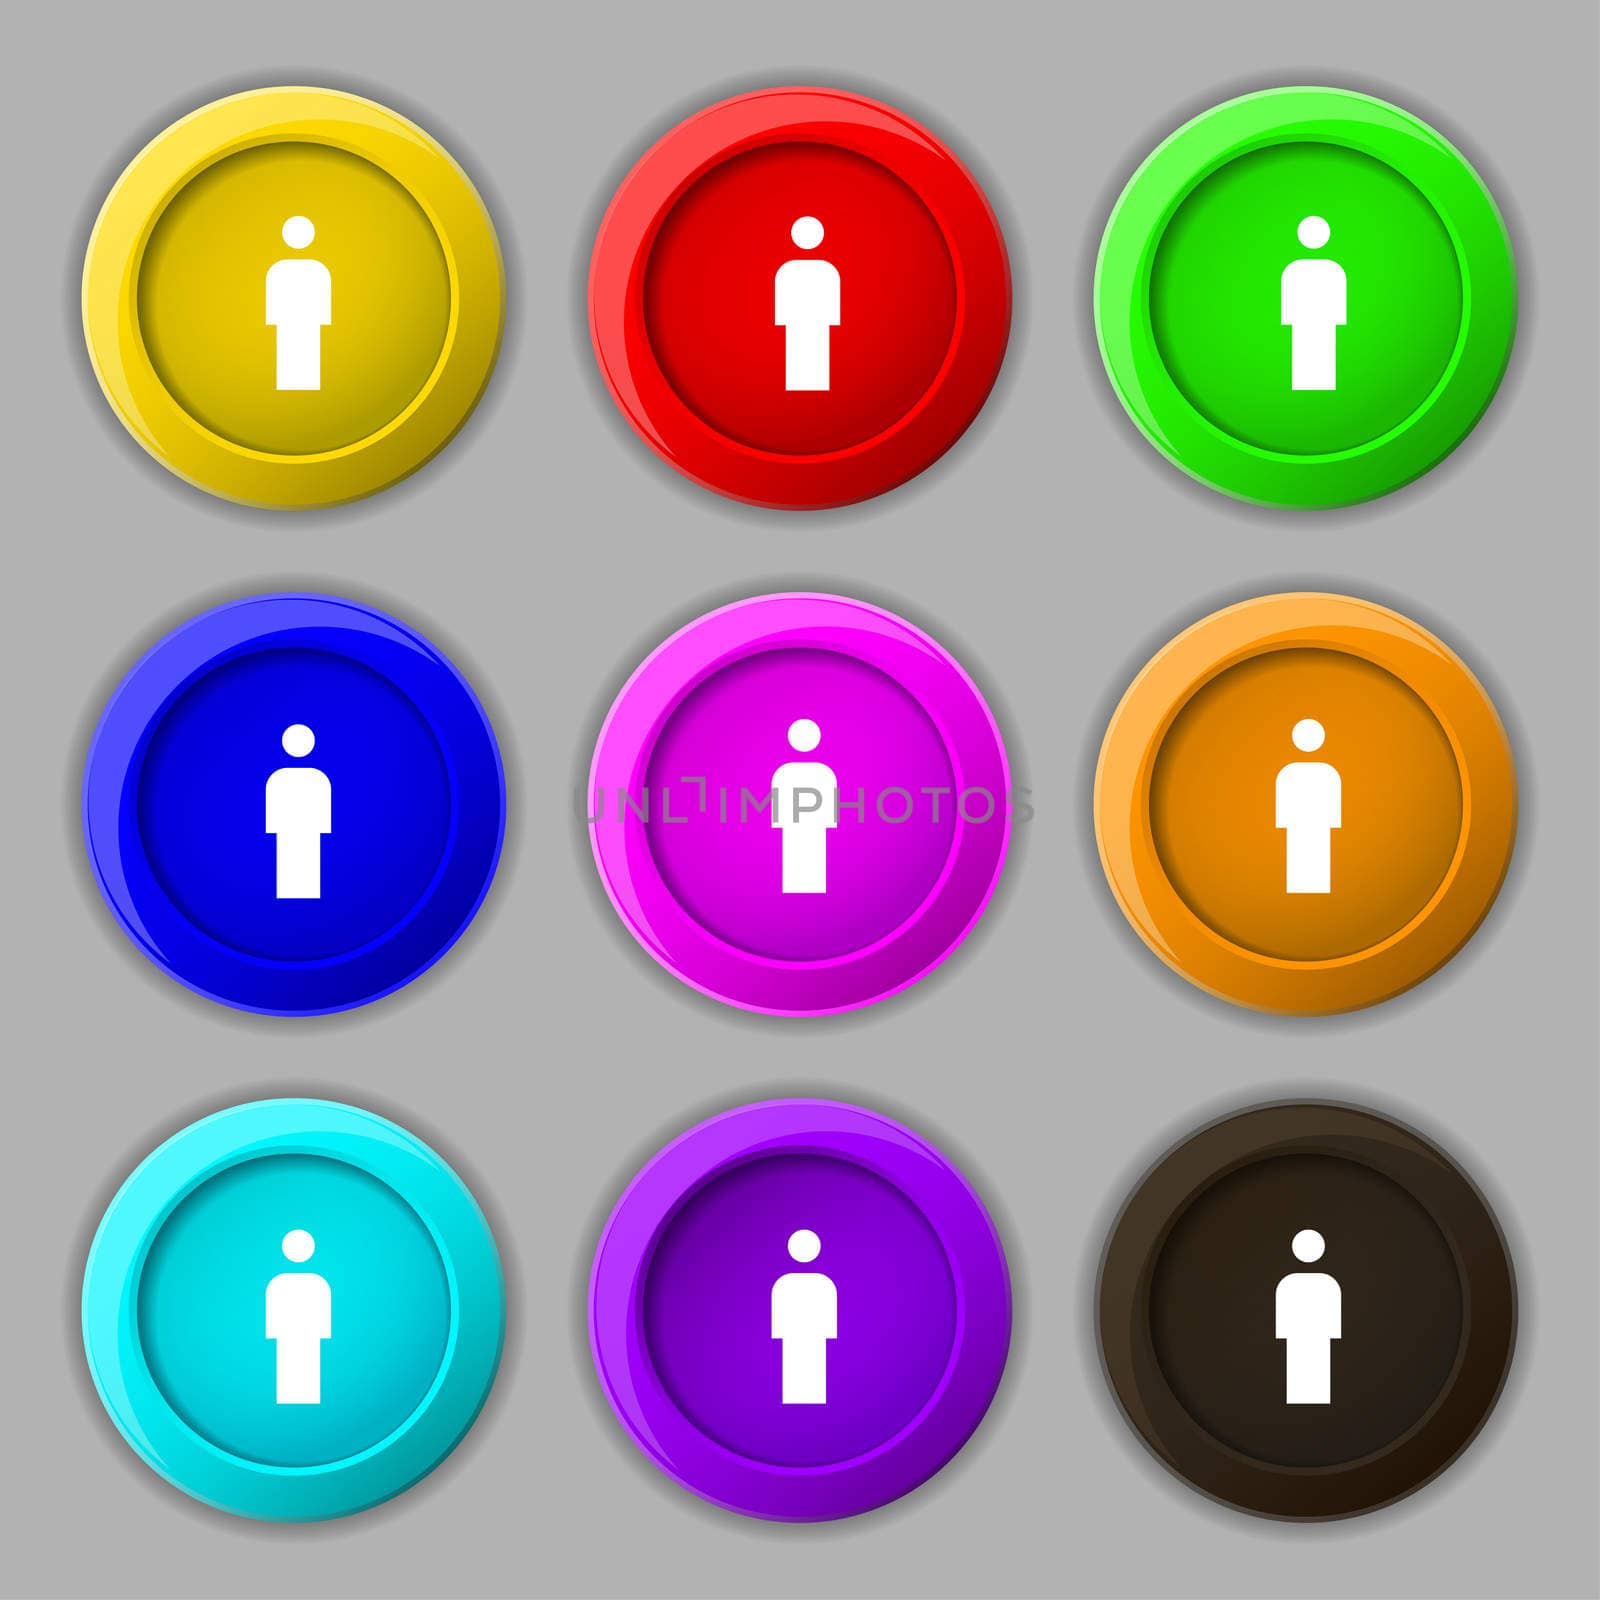 Human, Man Person, Male toilet icon sign. symbol on nine round colourful buttons. illustration